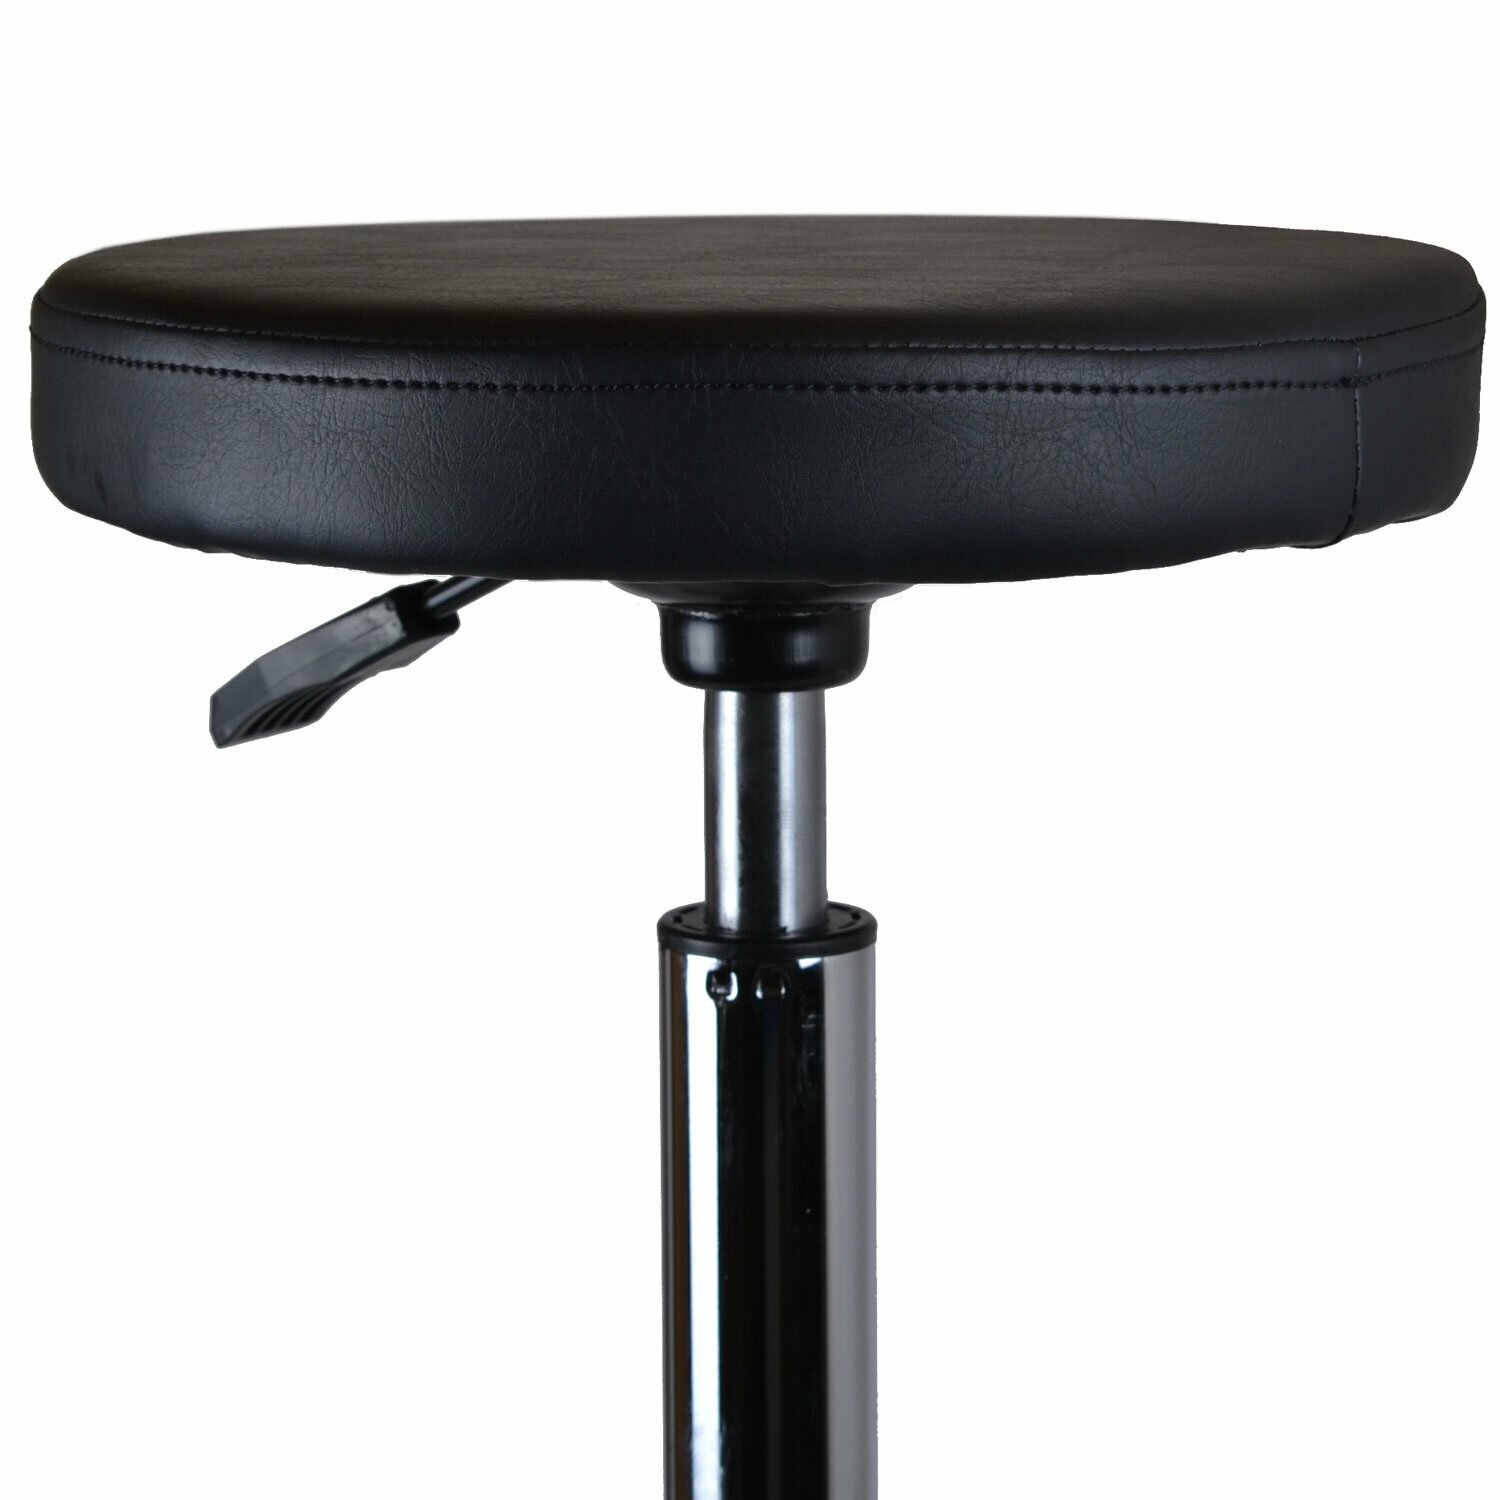 Groomer stool with upholstered seat